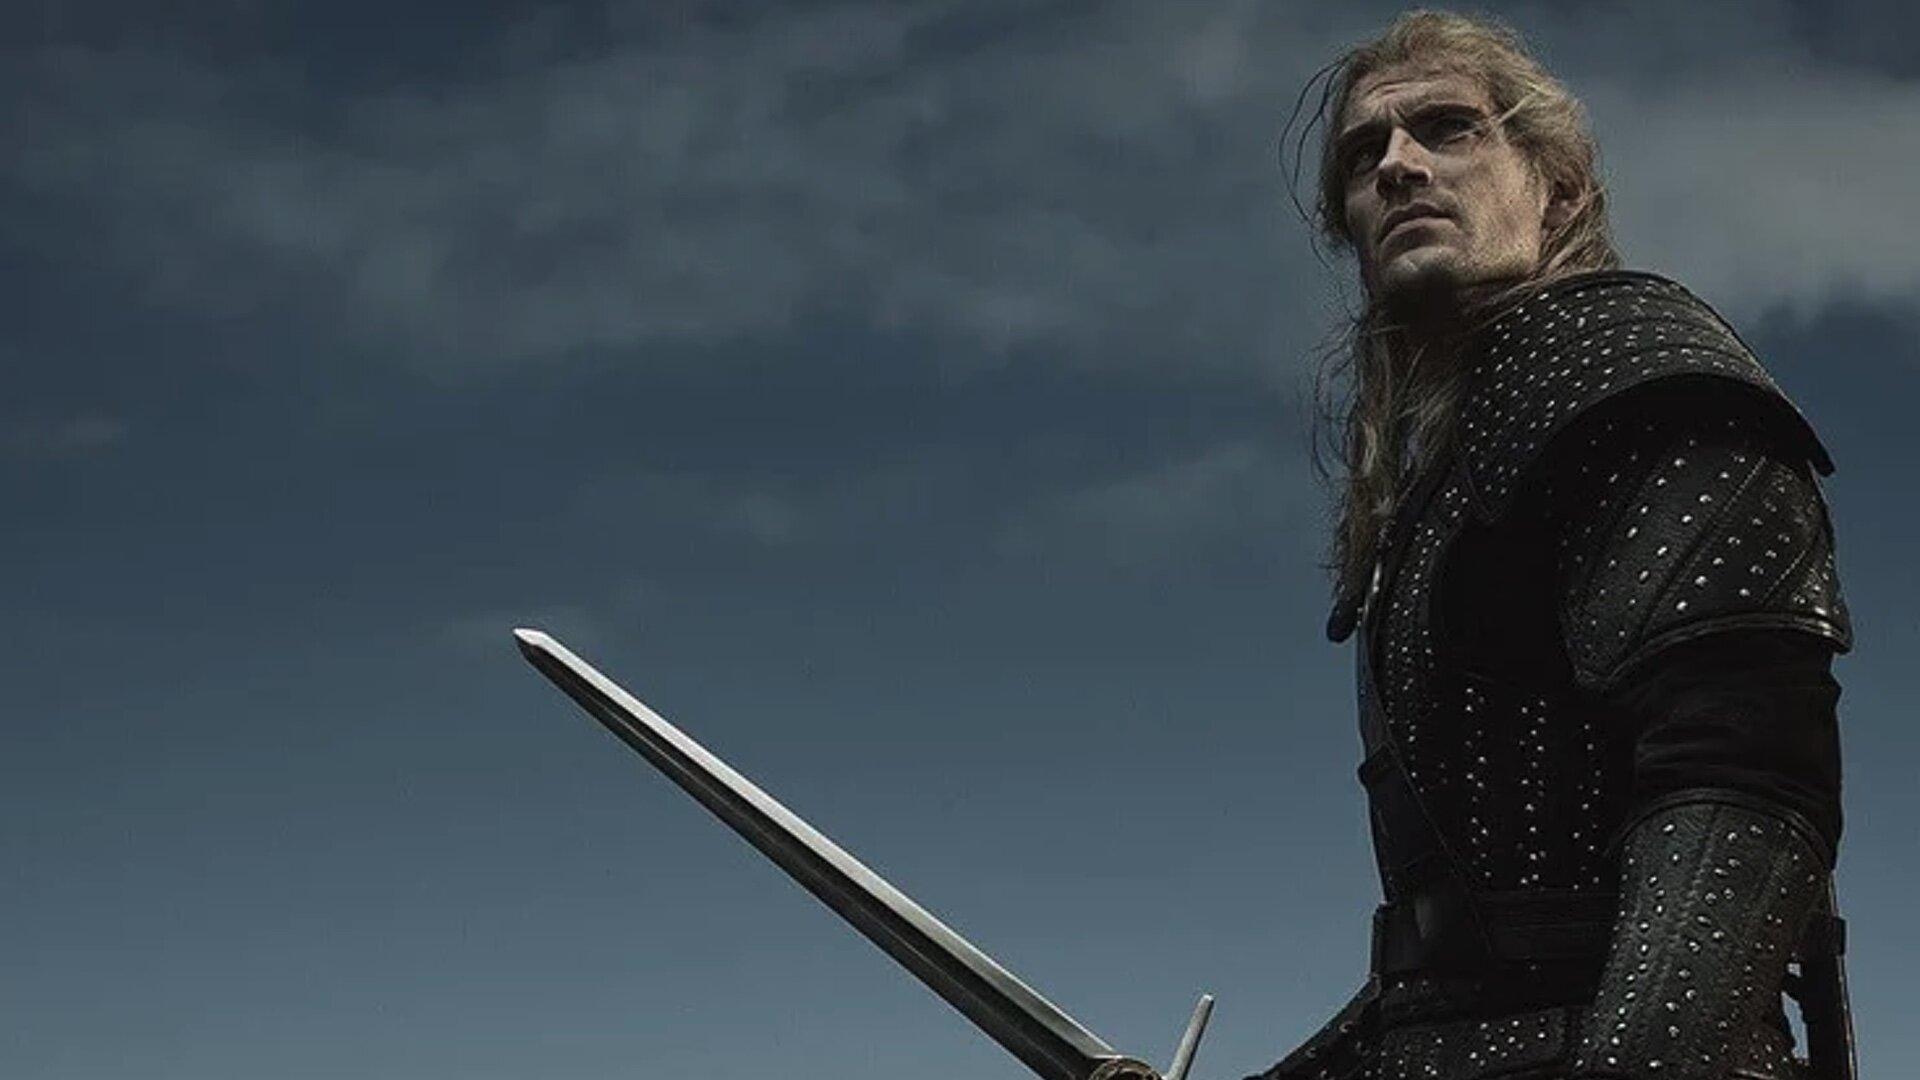 New Image From THE WITCHER Shows Henry Cavill Looking Like a